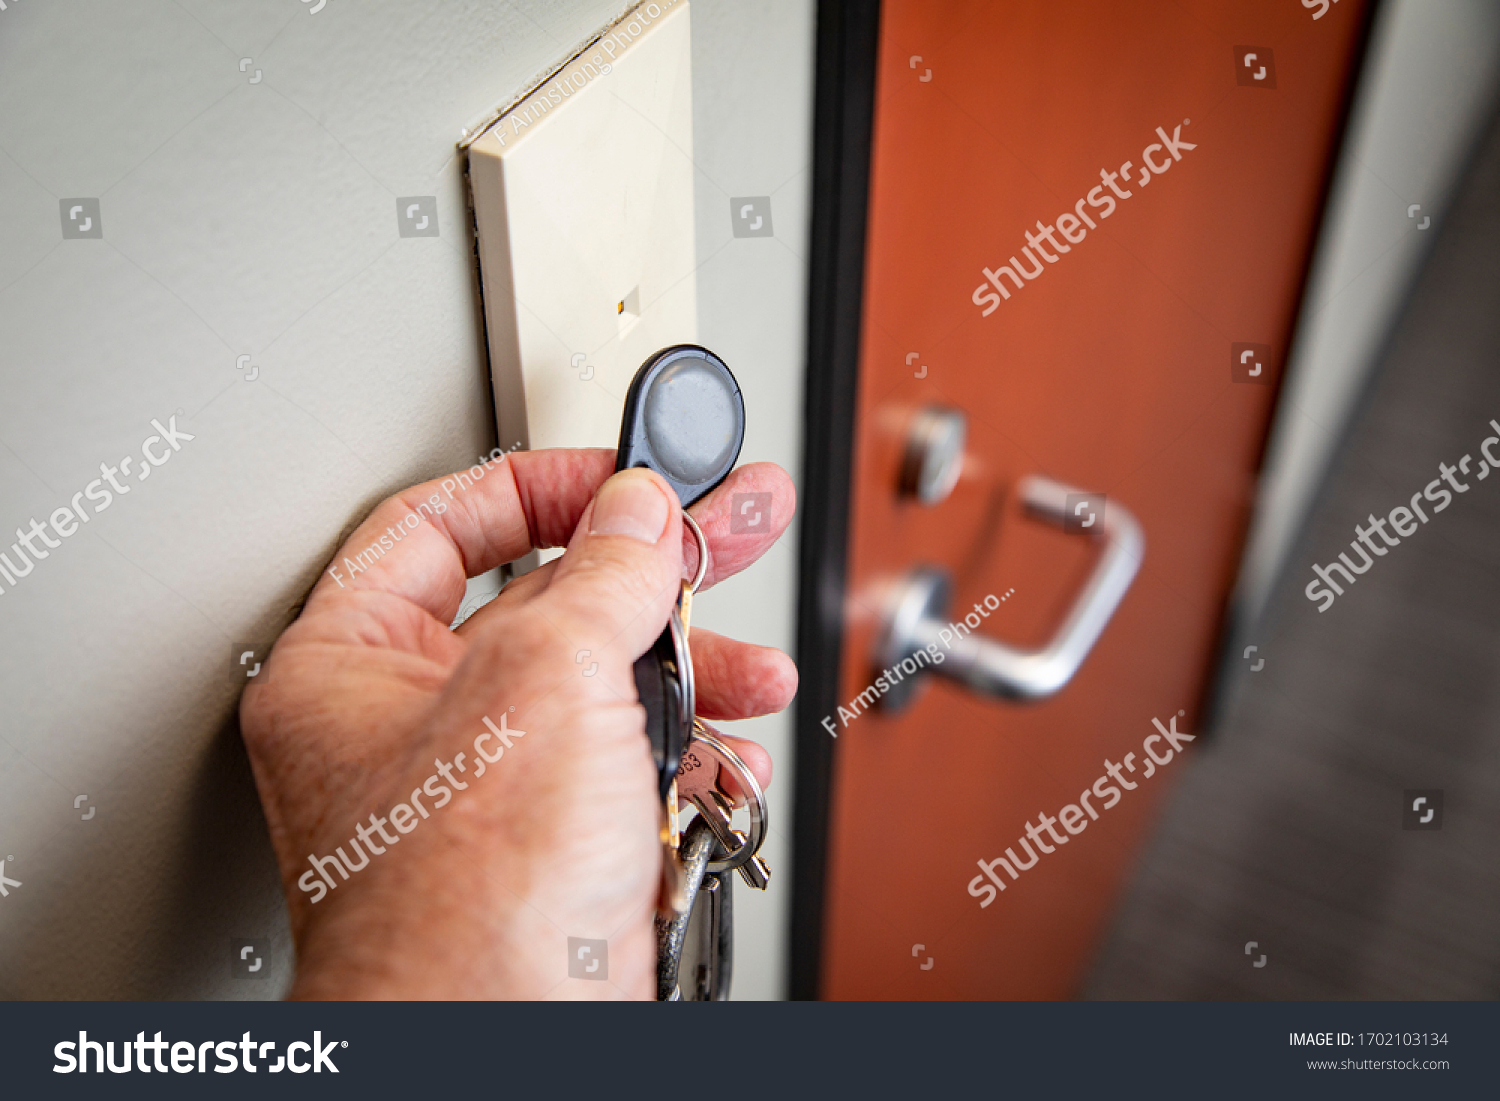 Close up of hand holding key FOB to gain access to an interior office door  #1702103134